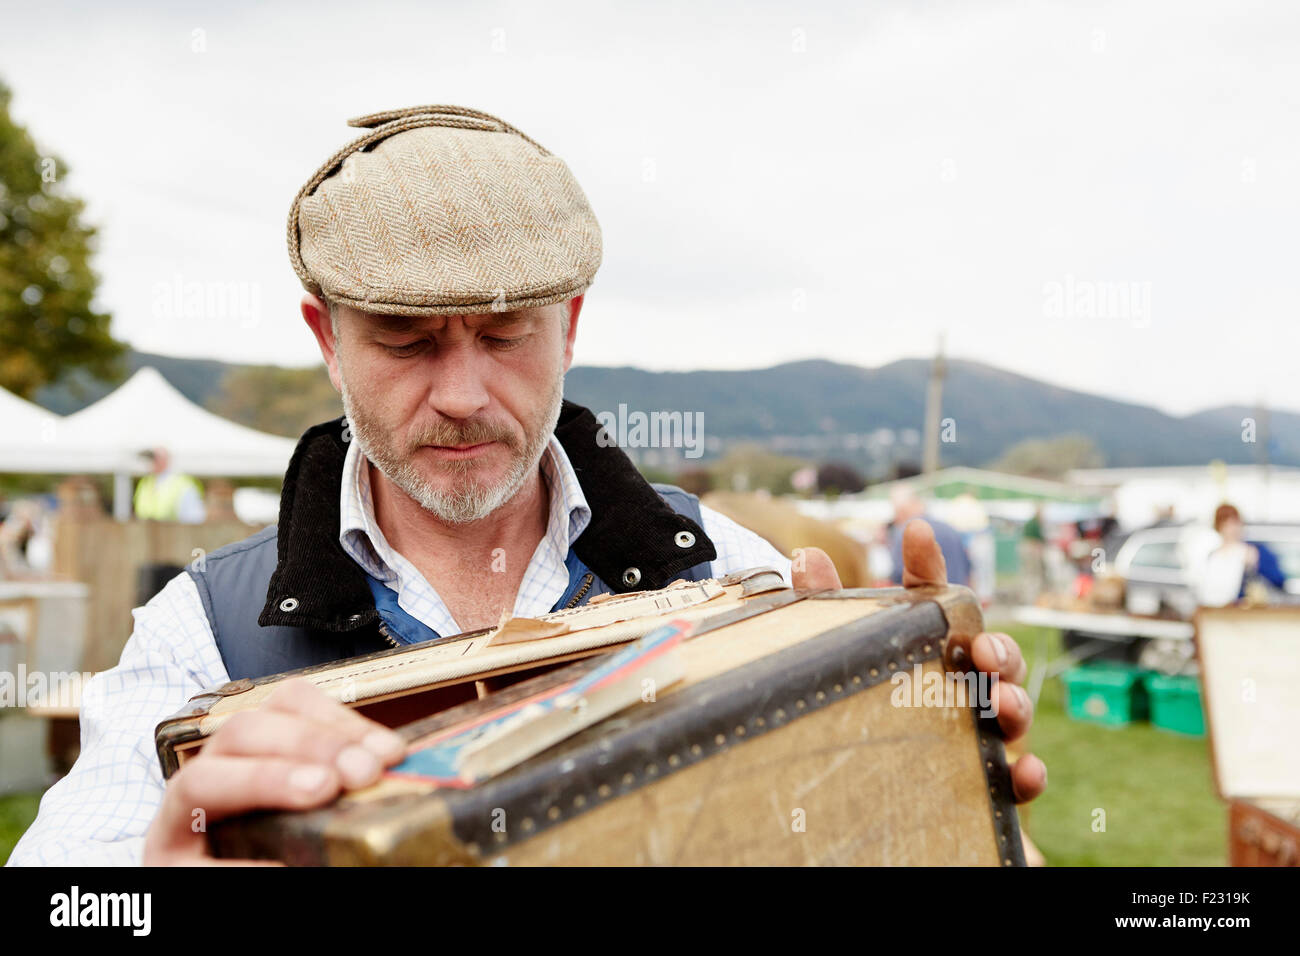 Man wearing a flat cap looking at a vintage suitcase at a flea market. Stock Photo